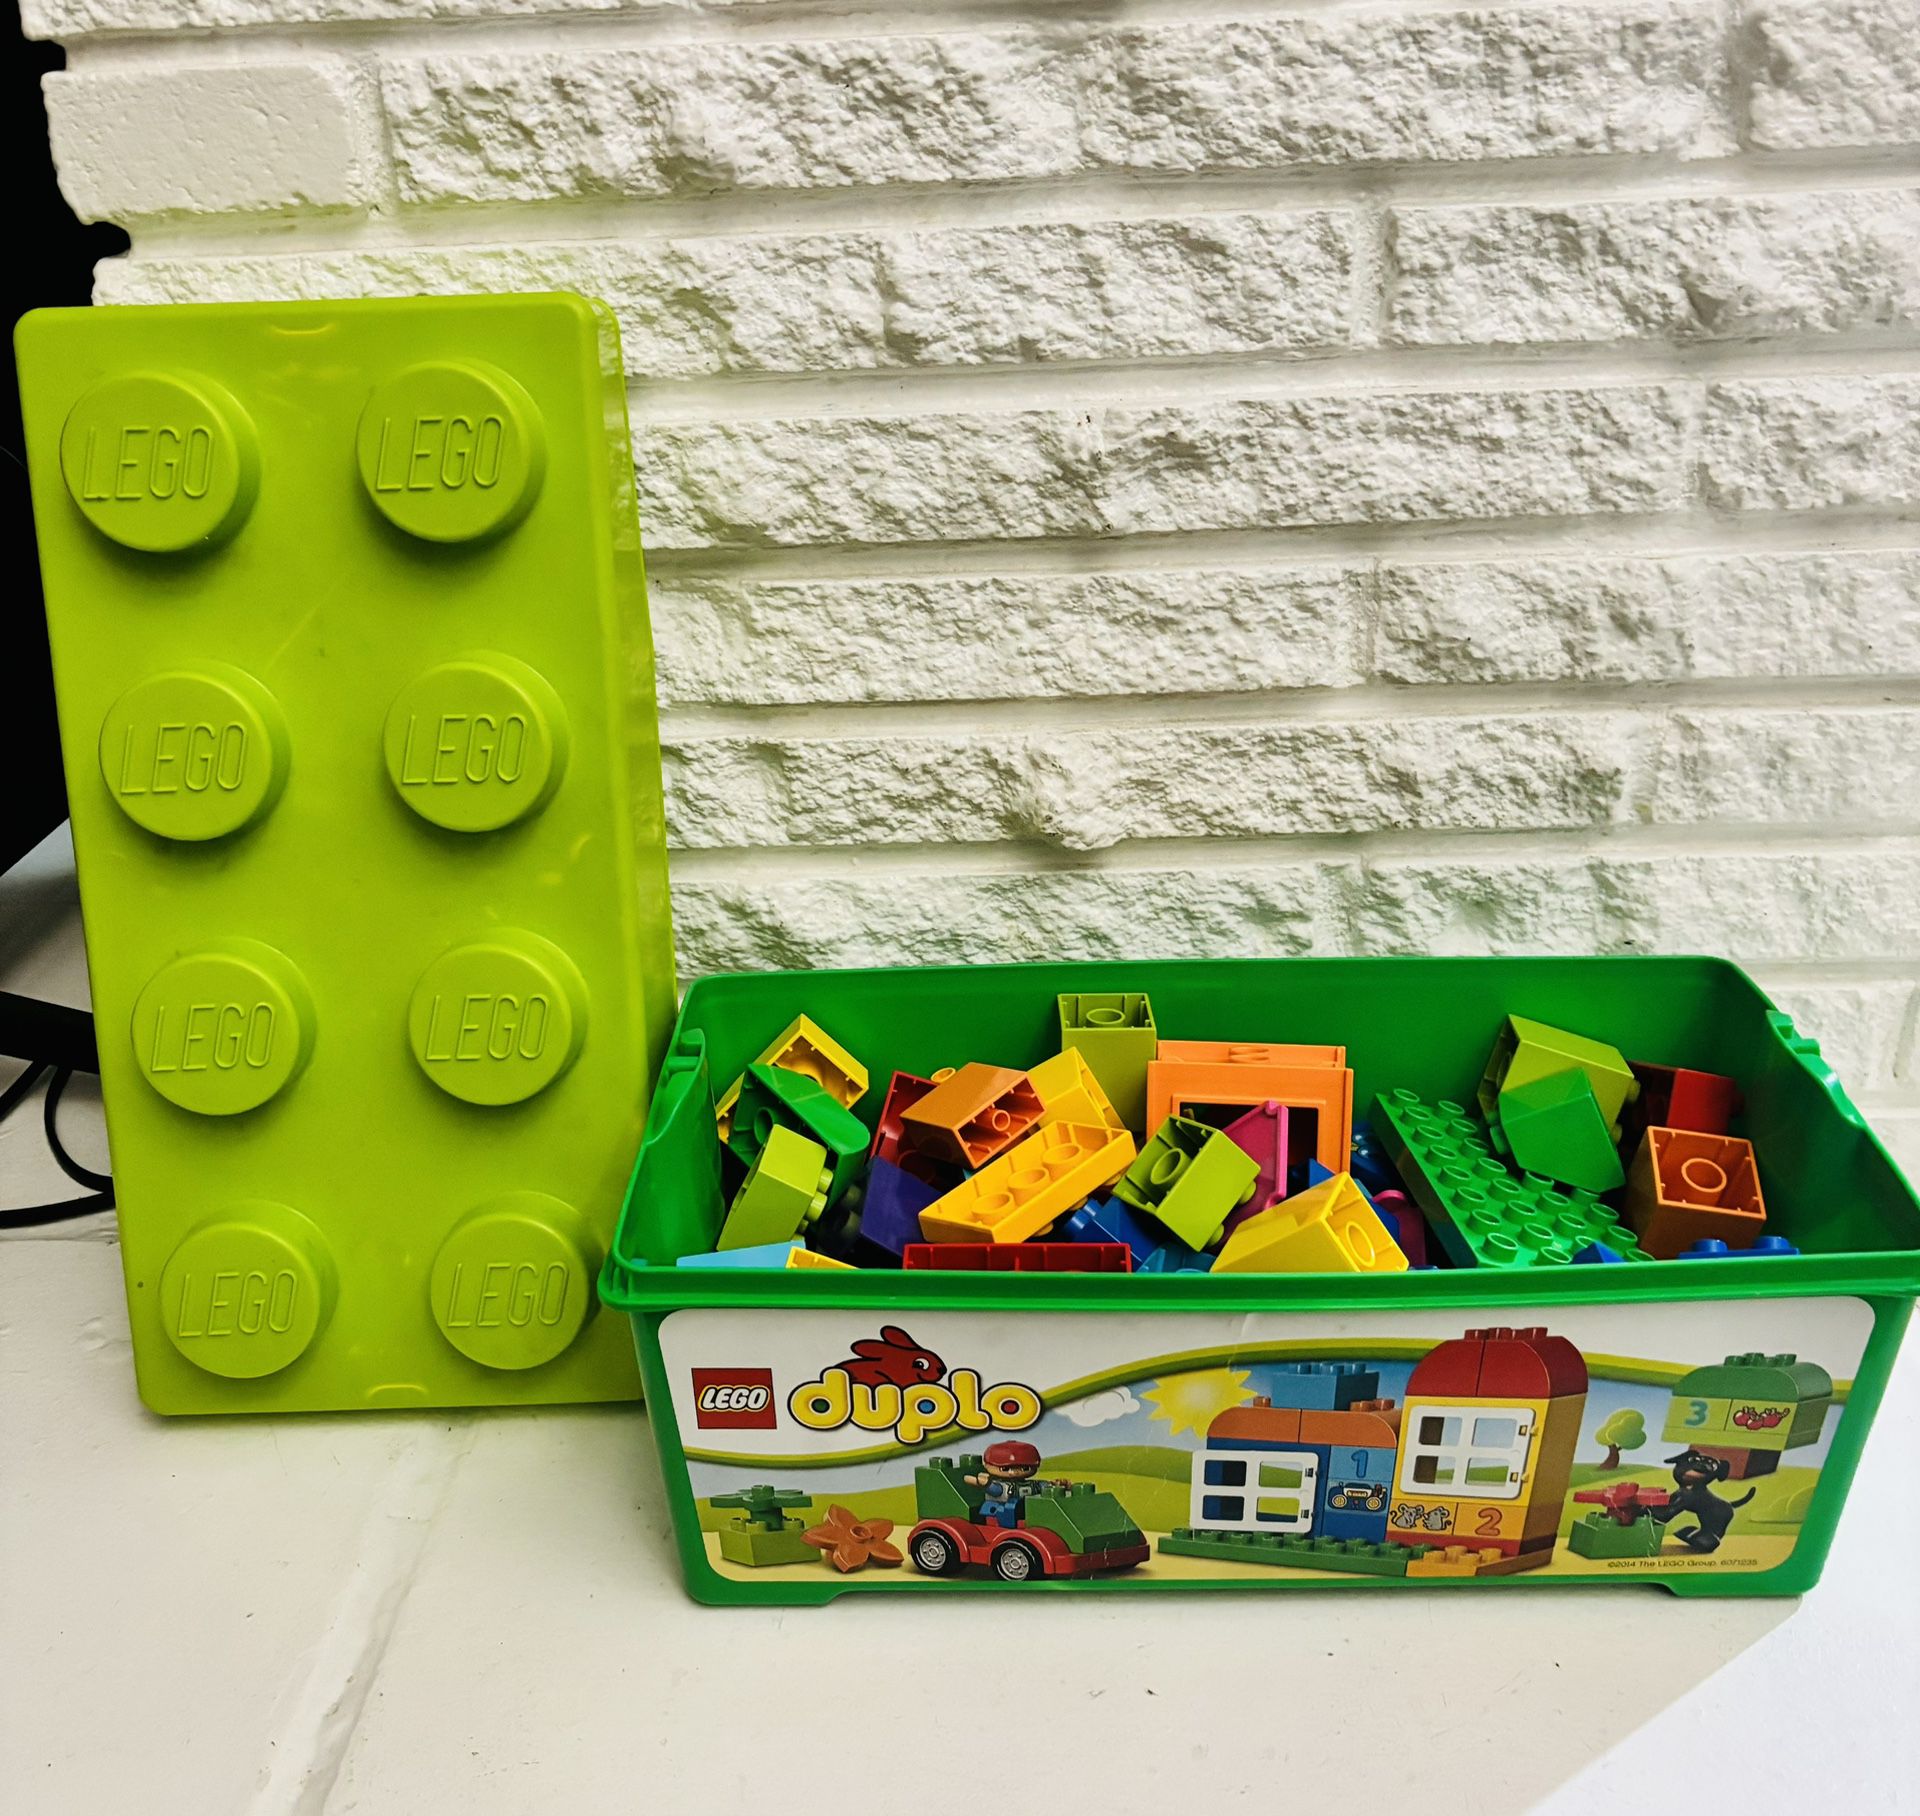 LEGO DUPLO Classic Brick Box 10913 with full pf bricks and characters